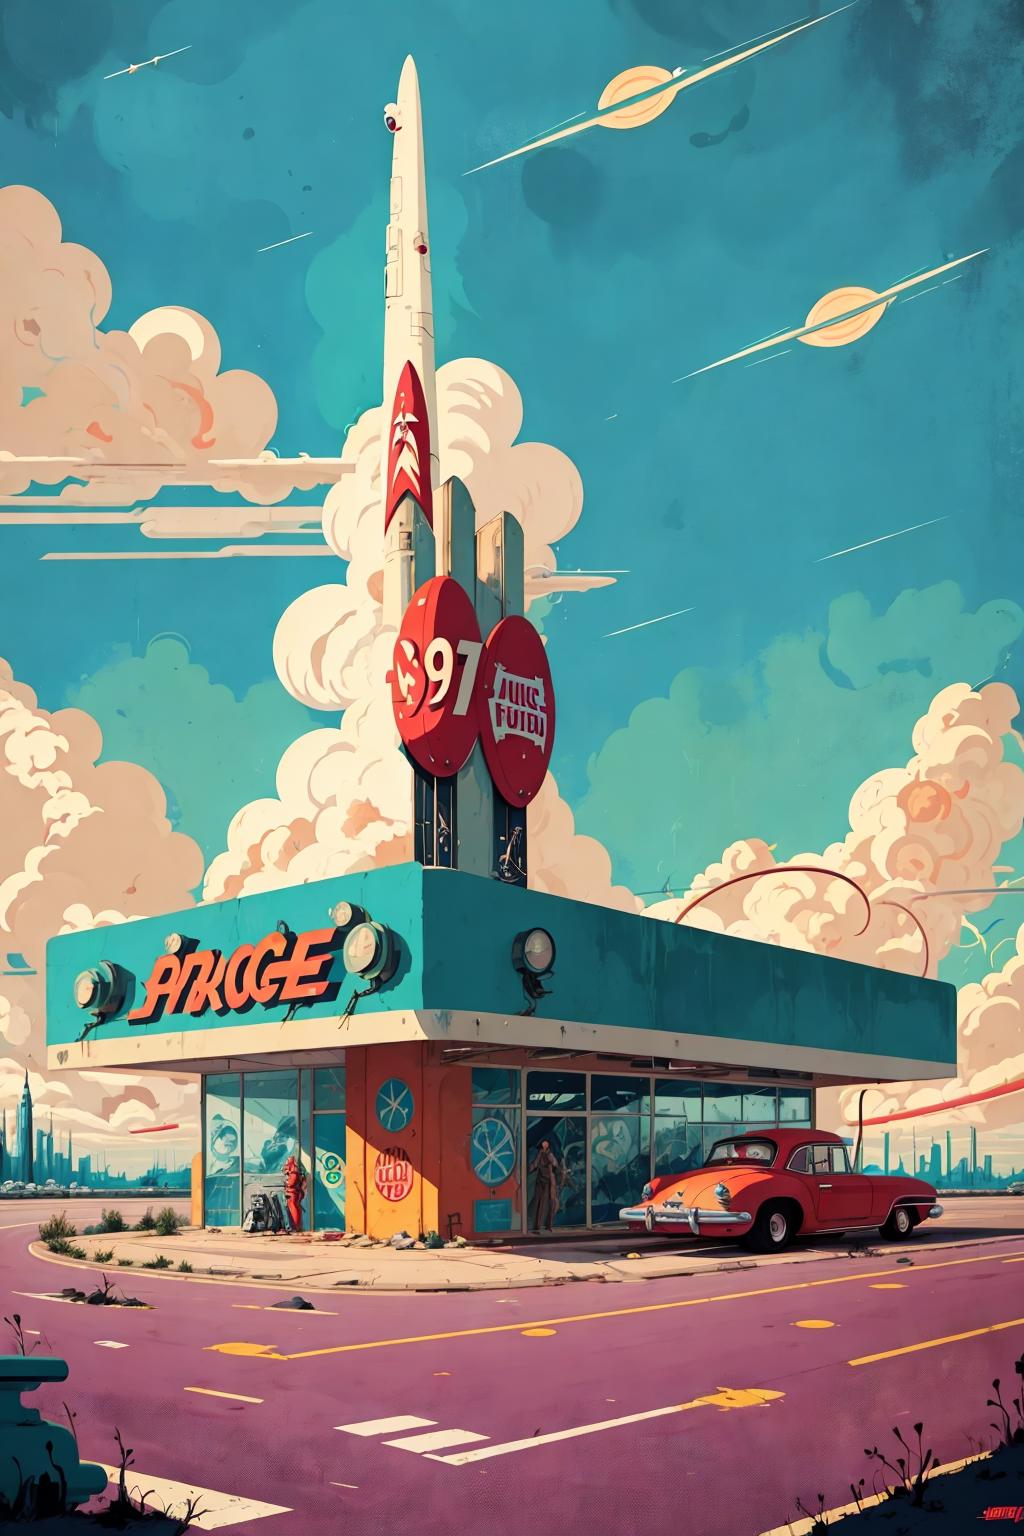 Futuristic Priceless Gas Station with Space Travel Theme and a Red Car